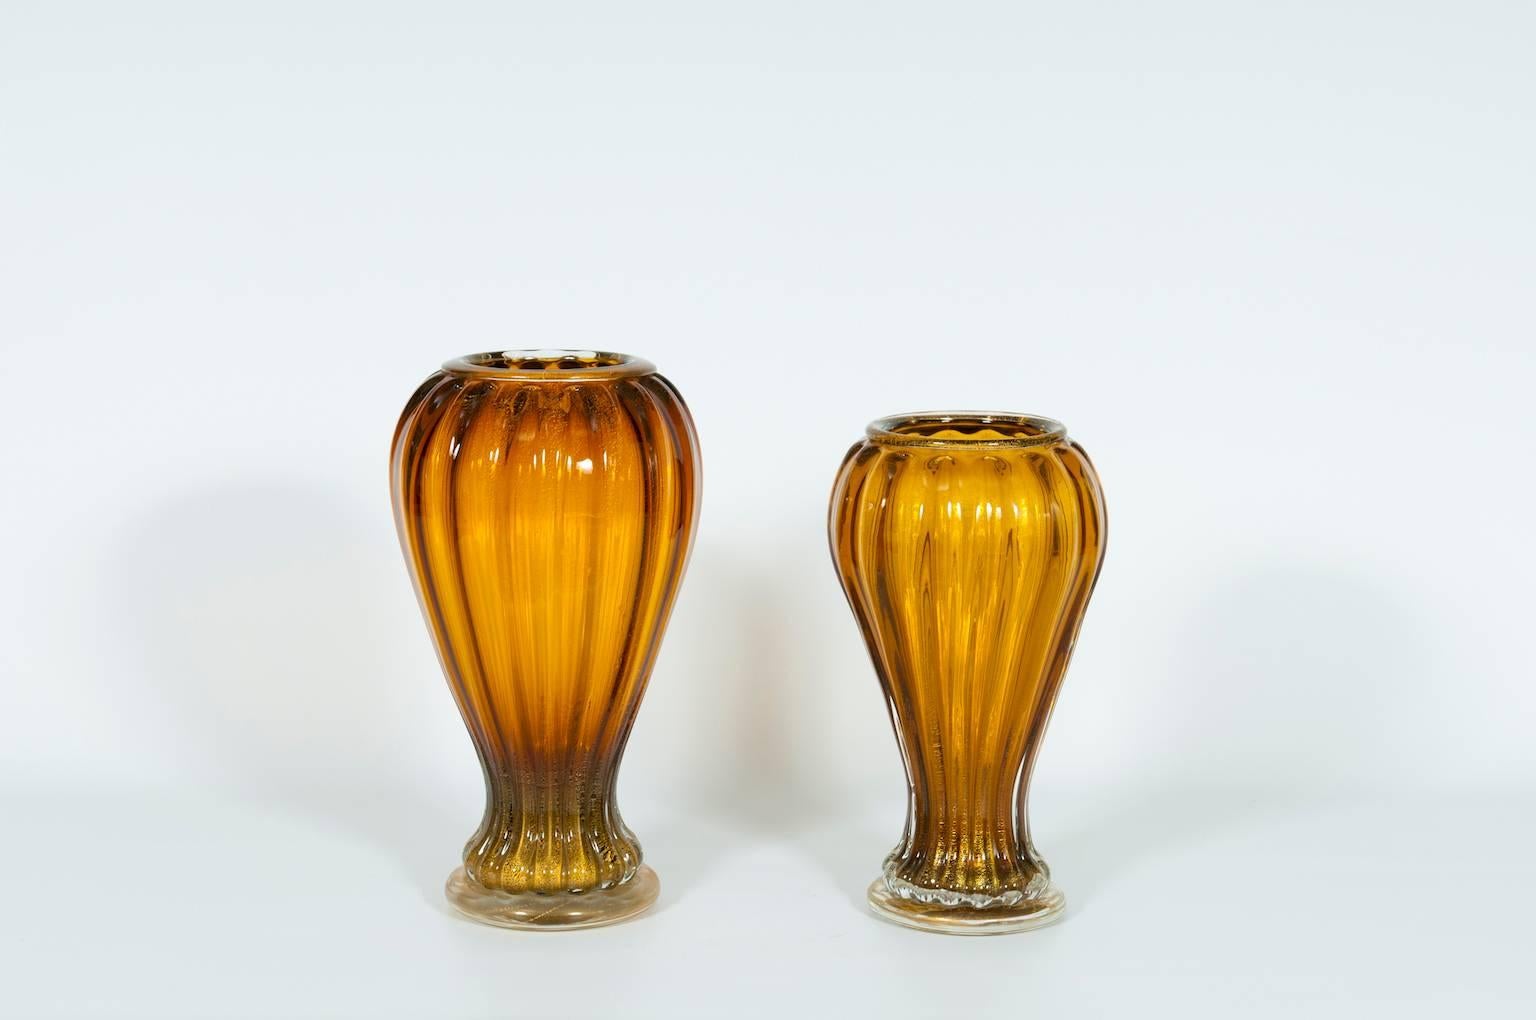 Pair of modern Italian vases in Murano glass amber and gold in two different size, in very excellent original condition, entirely realized handcrafted and handblown in the Venice Murano Island, circa 1990s.
Measures 1° vase:
Height 15.35 in. / 39